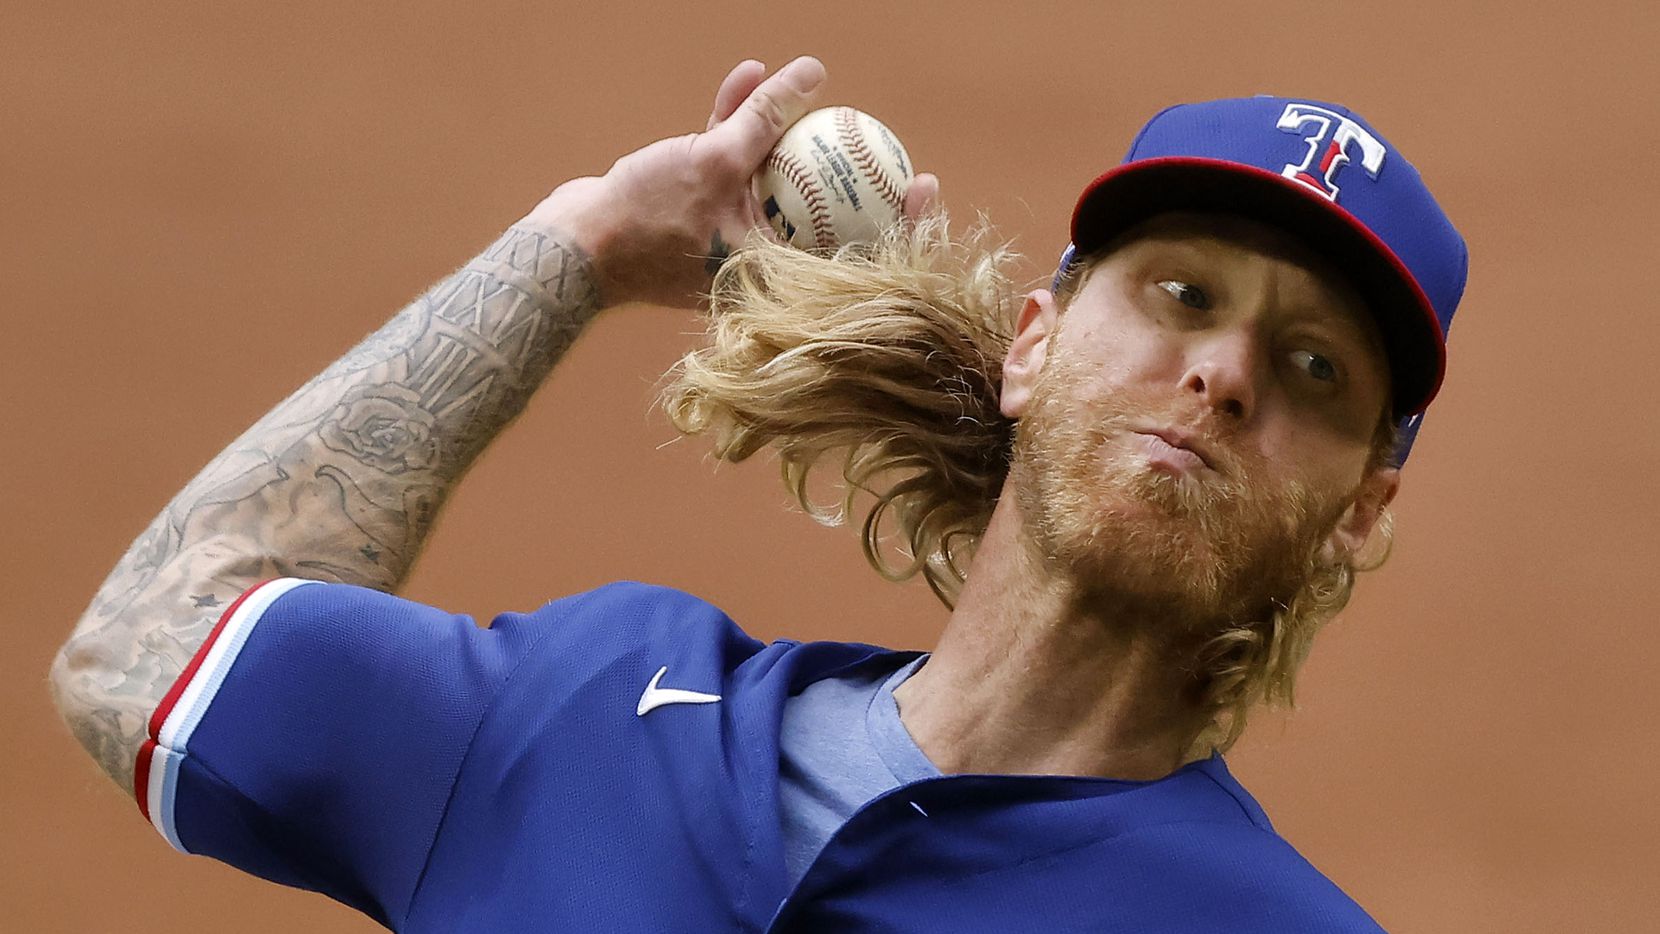 Texas Rangers starting pitcher Mike Foltynewicz (20) throws against the Milwaukee Brewers in the third inning at Globe Life Field in Arlington, Texas. The teams were playing in an exhibition game, Tuesday, March 30, 2021.